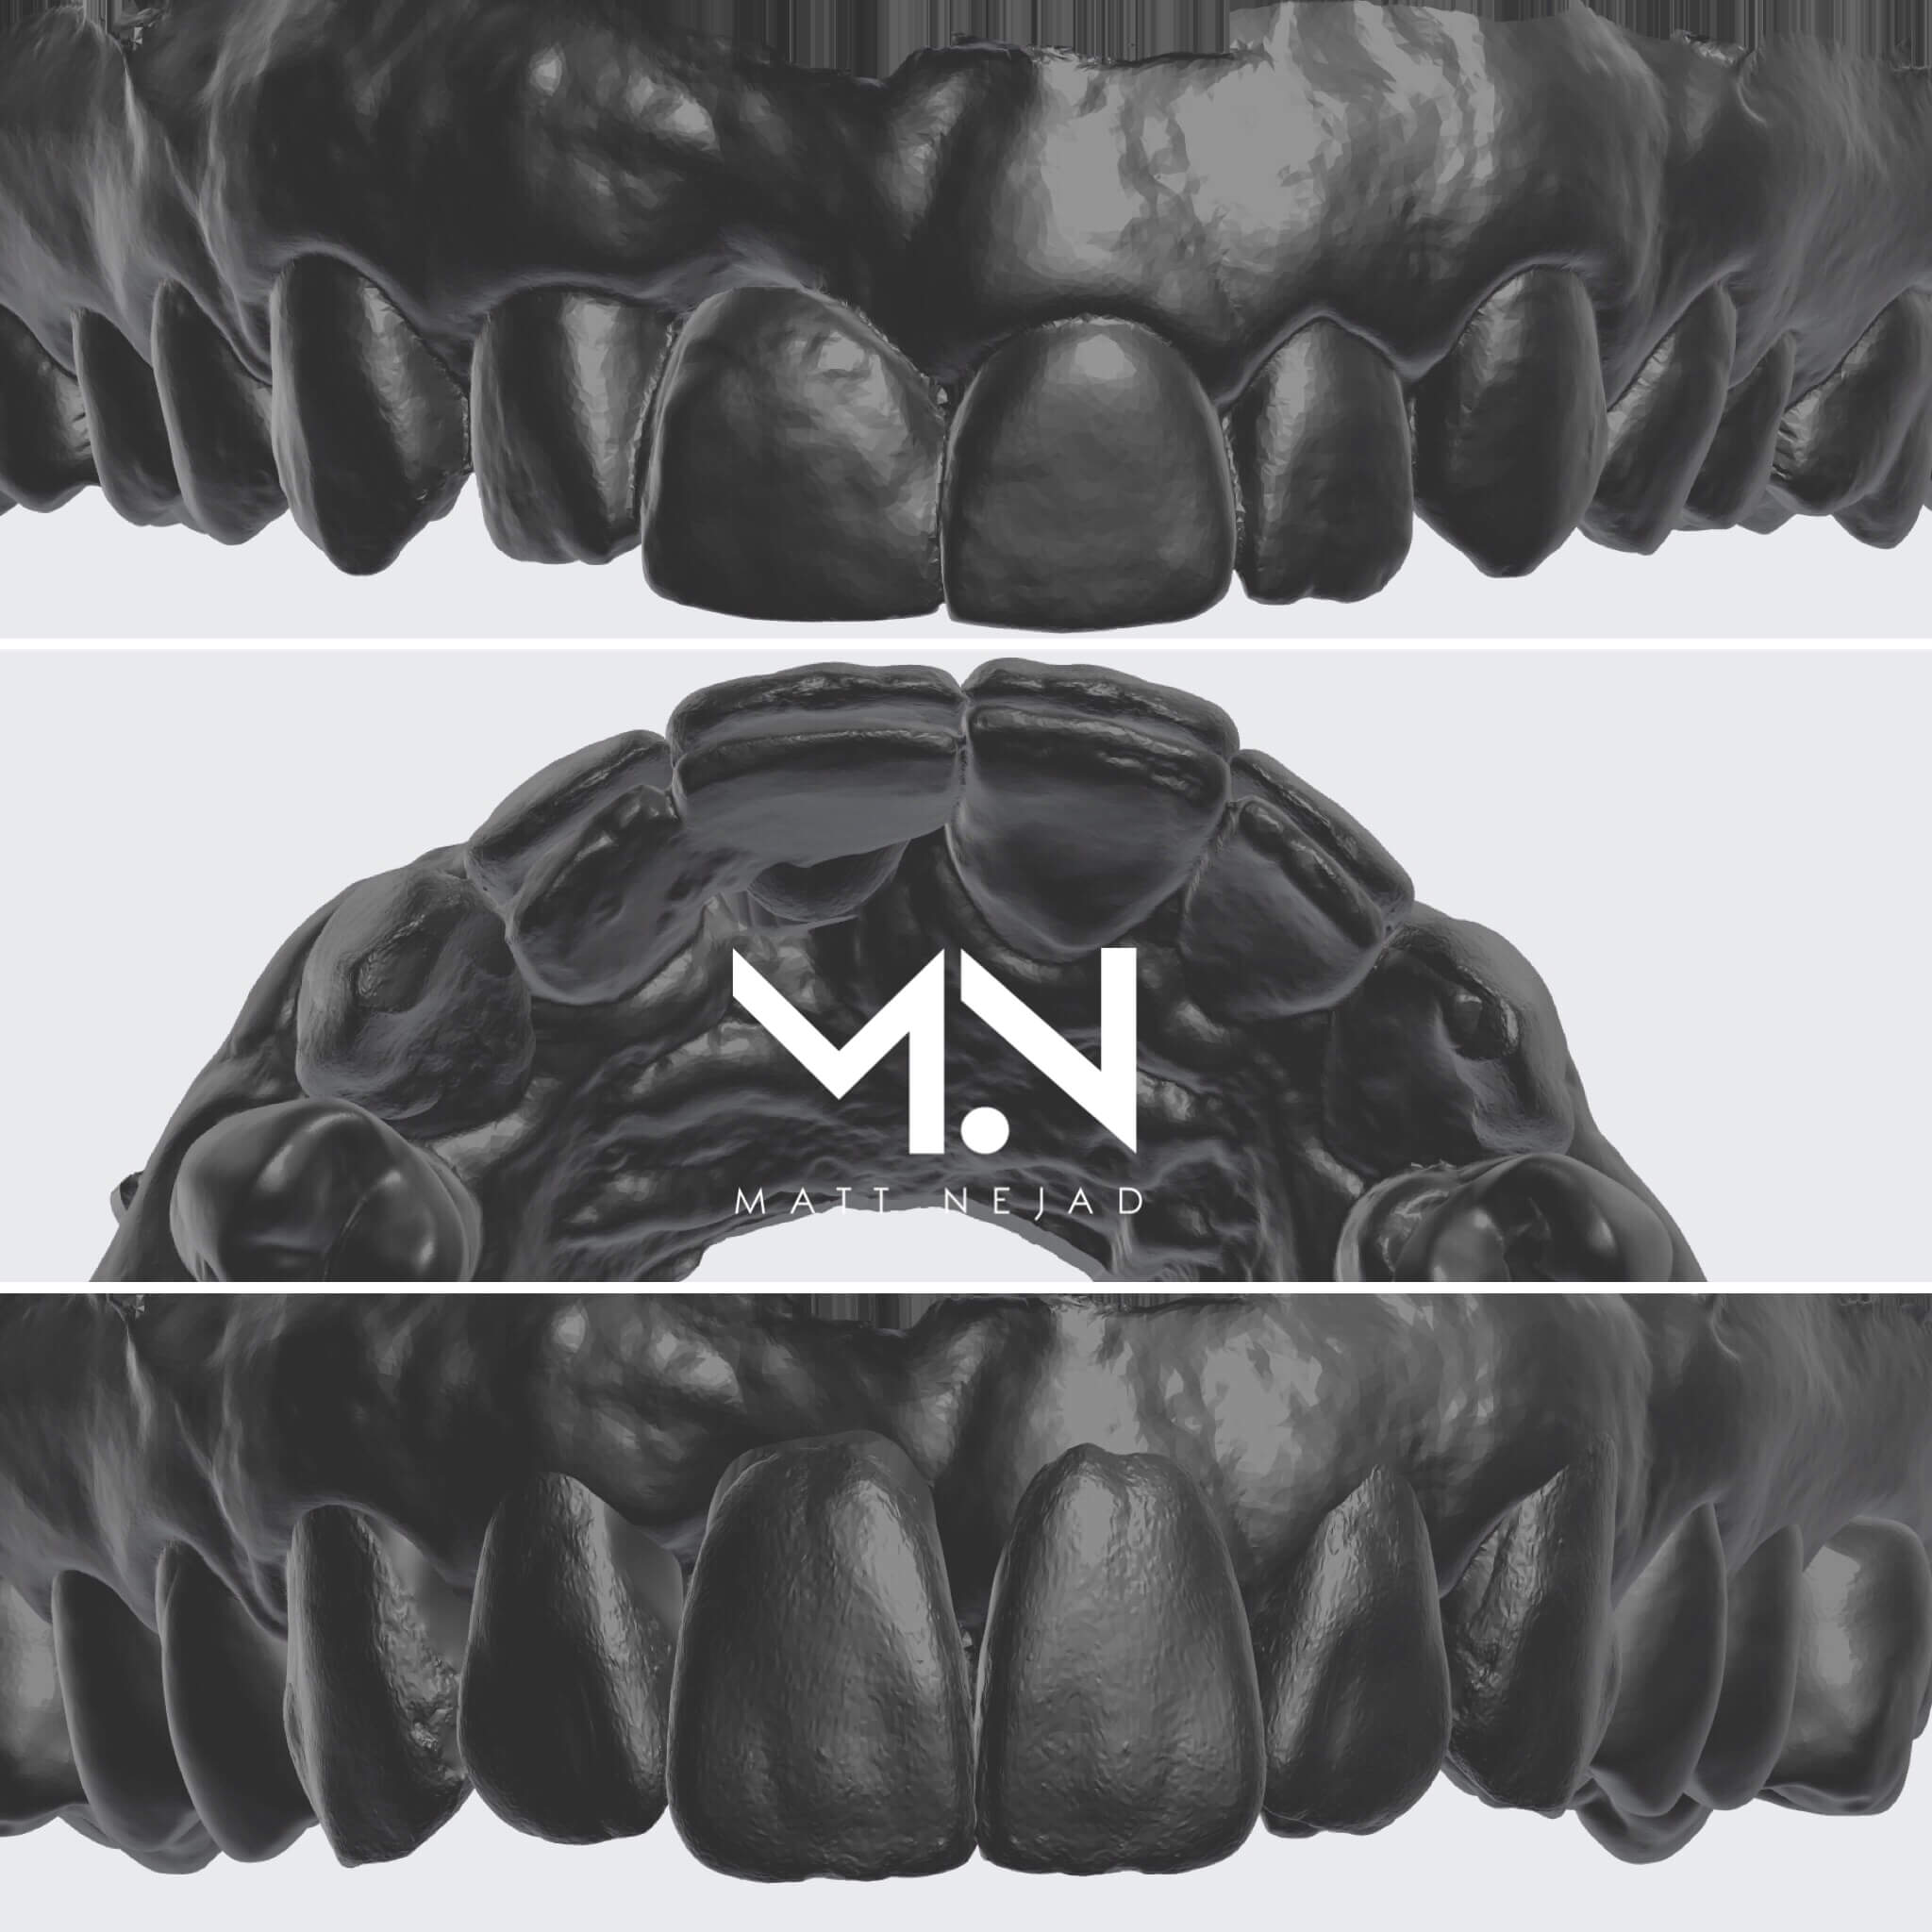 STL files before and after digital smile design is completed.